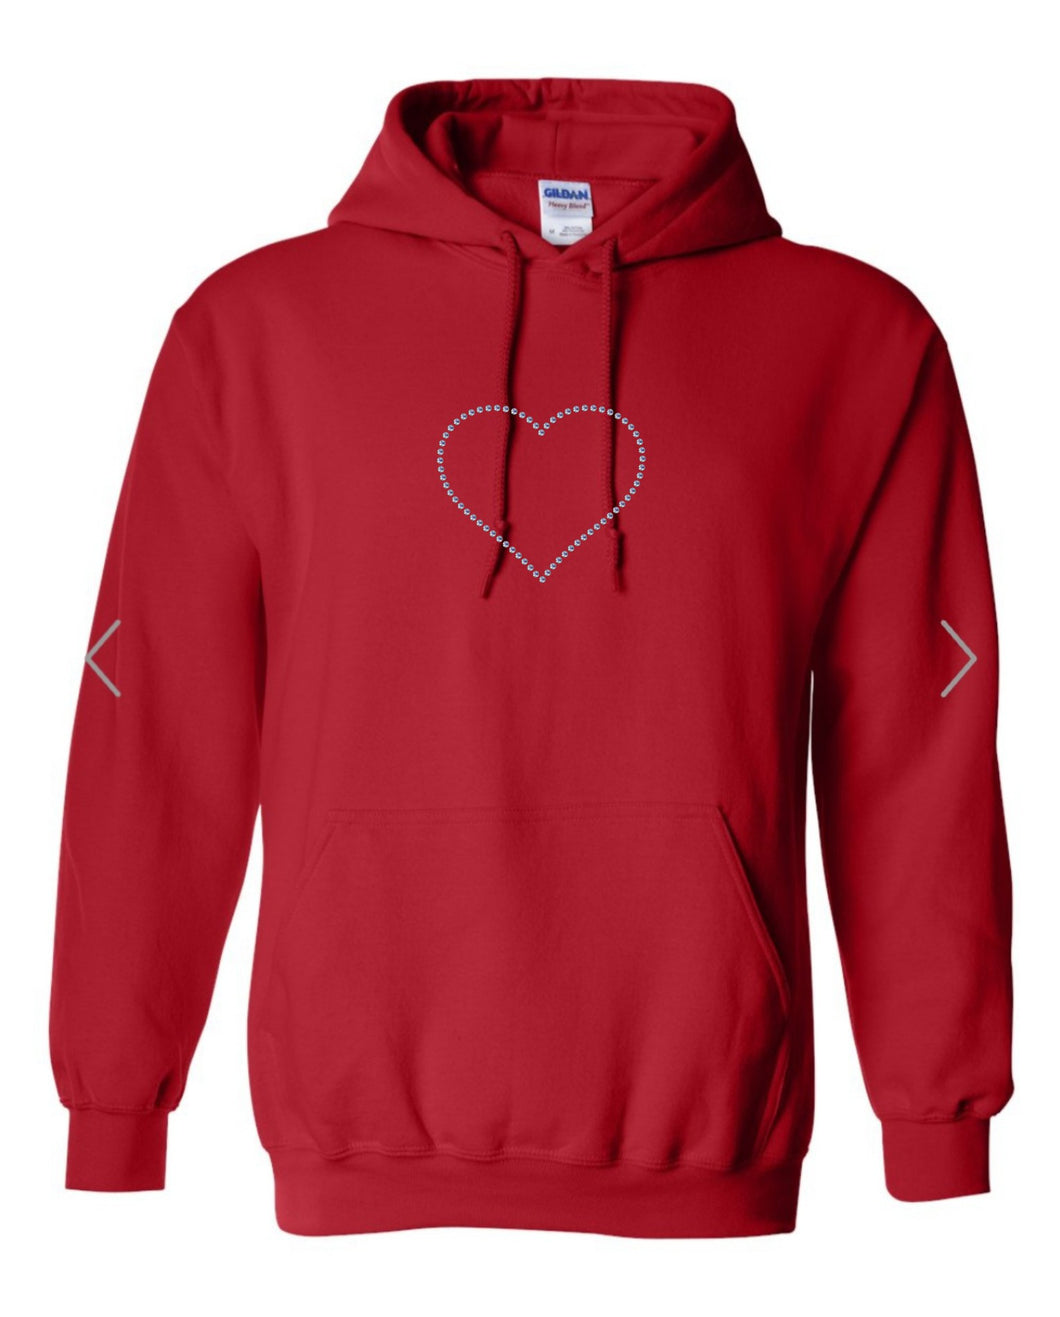 RED HOODIE WITH CLEAR RHINESTONE 